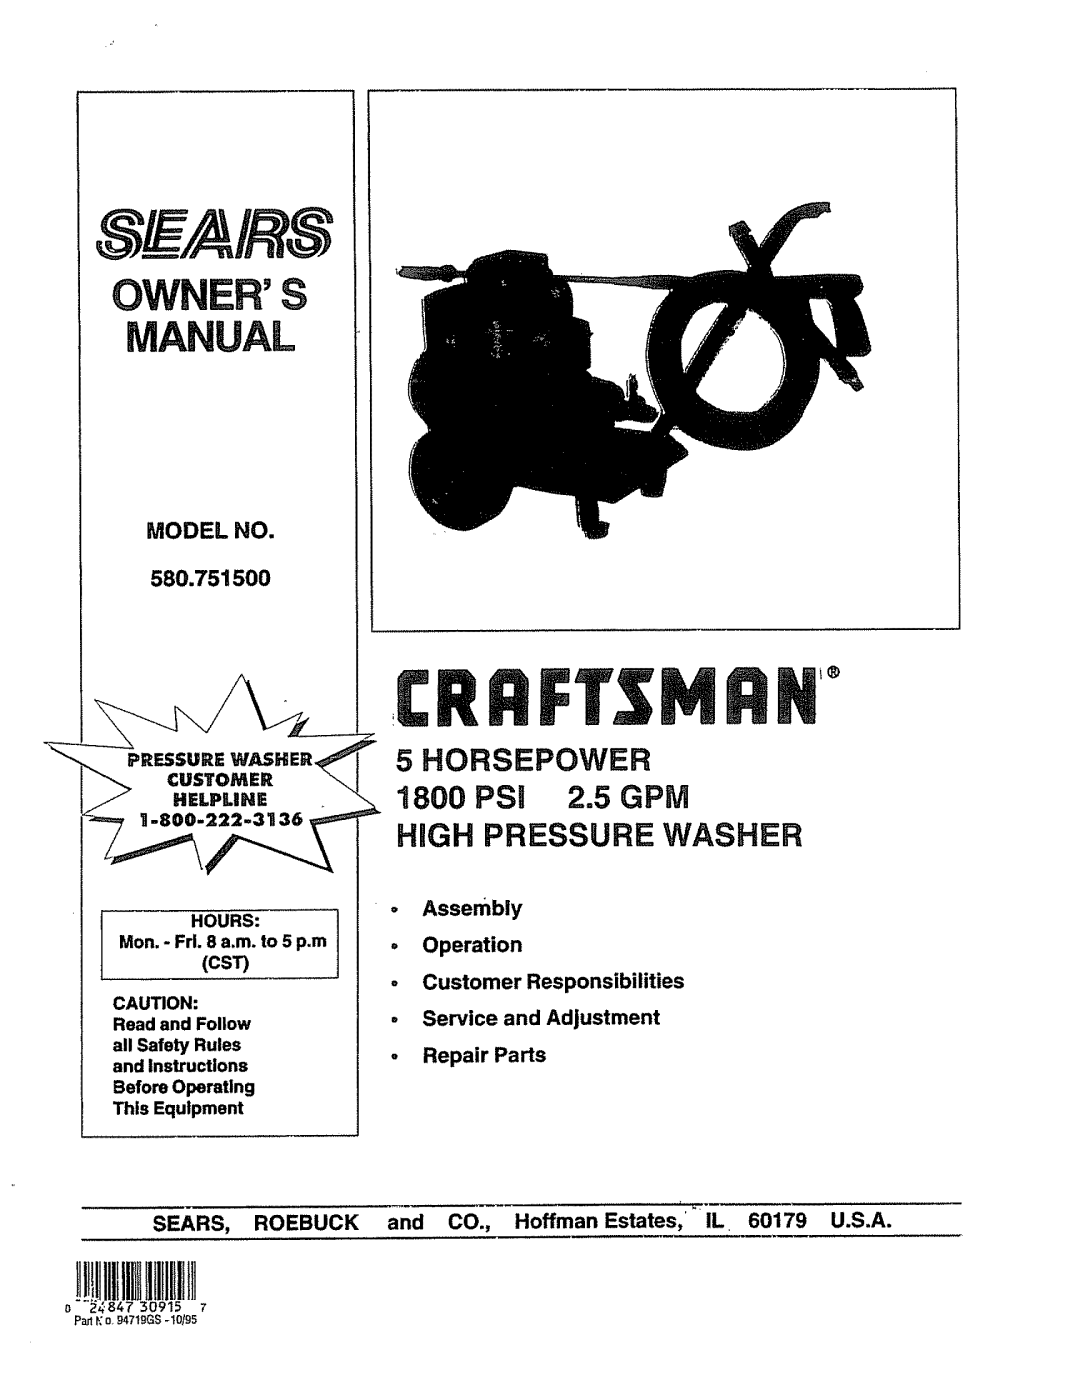 Sears manual HiGH PRESSURE WASHER, 5HORSEPOWER 1800 PS! 2.5 GPM, MODEL NO 580.751500, Assembly, Operation, Service 